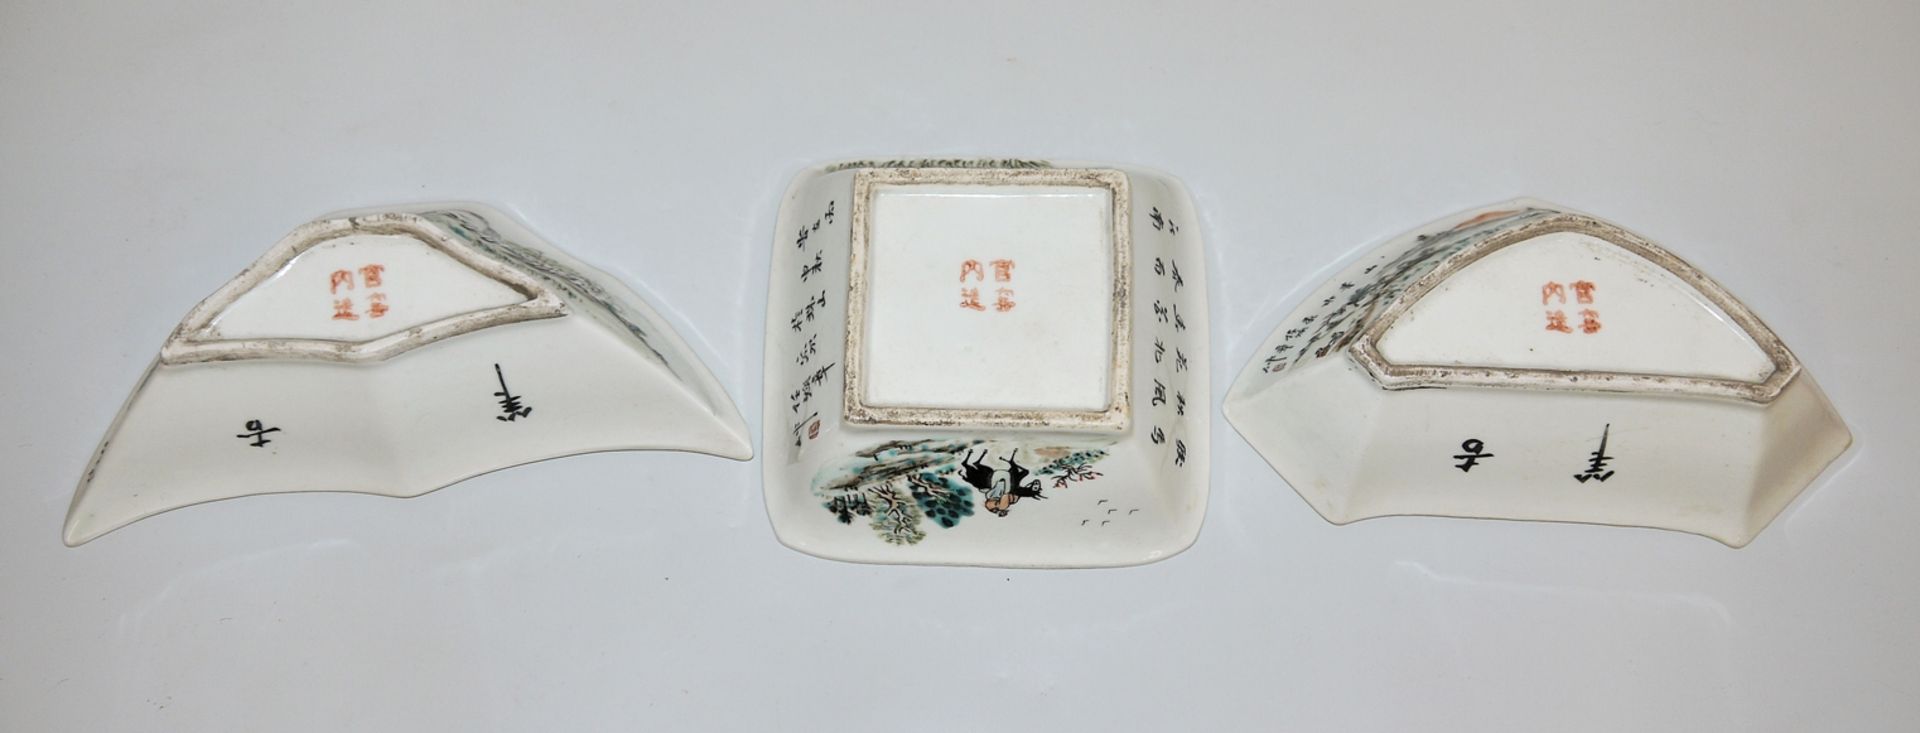 9-piece porcelain cabaret from the Republic period, China 1st half of the 20th century - Image 4 of 4